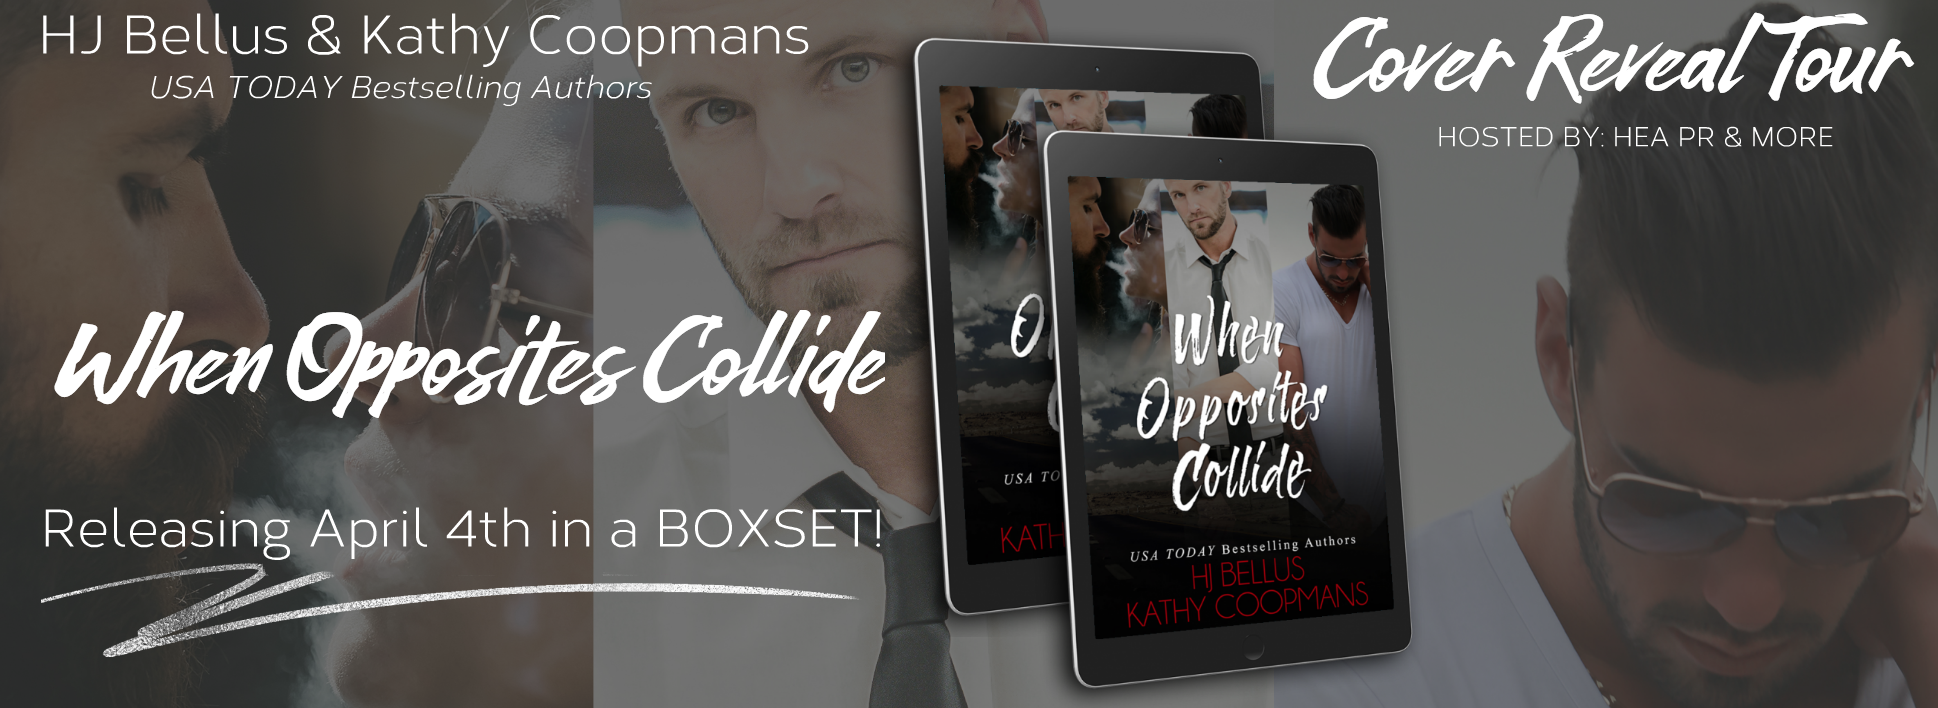 Cover Reveal: When Opposites Collide by HJ Bellus and Katy Coopmans